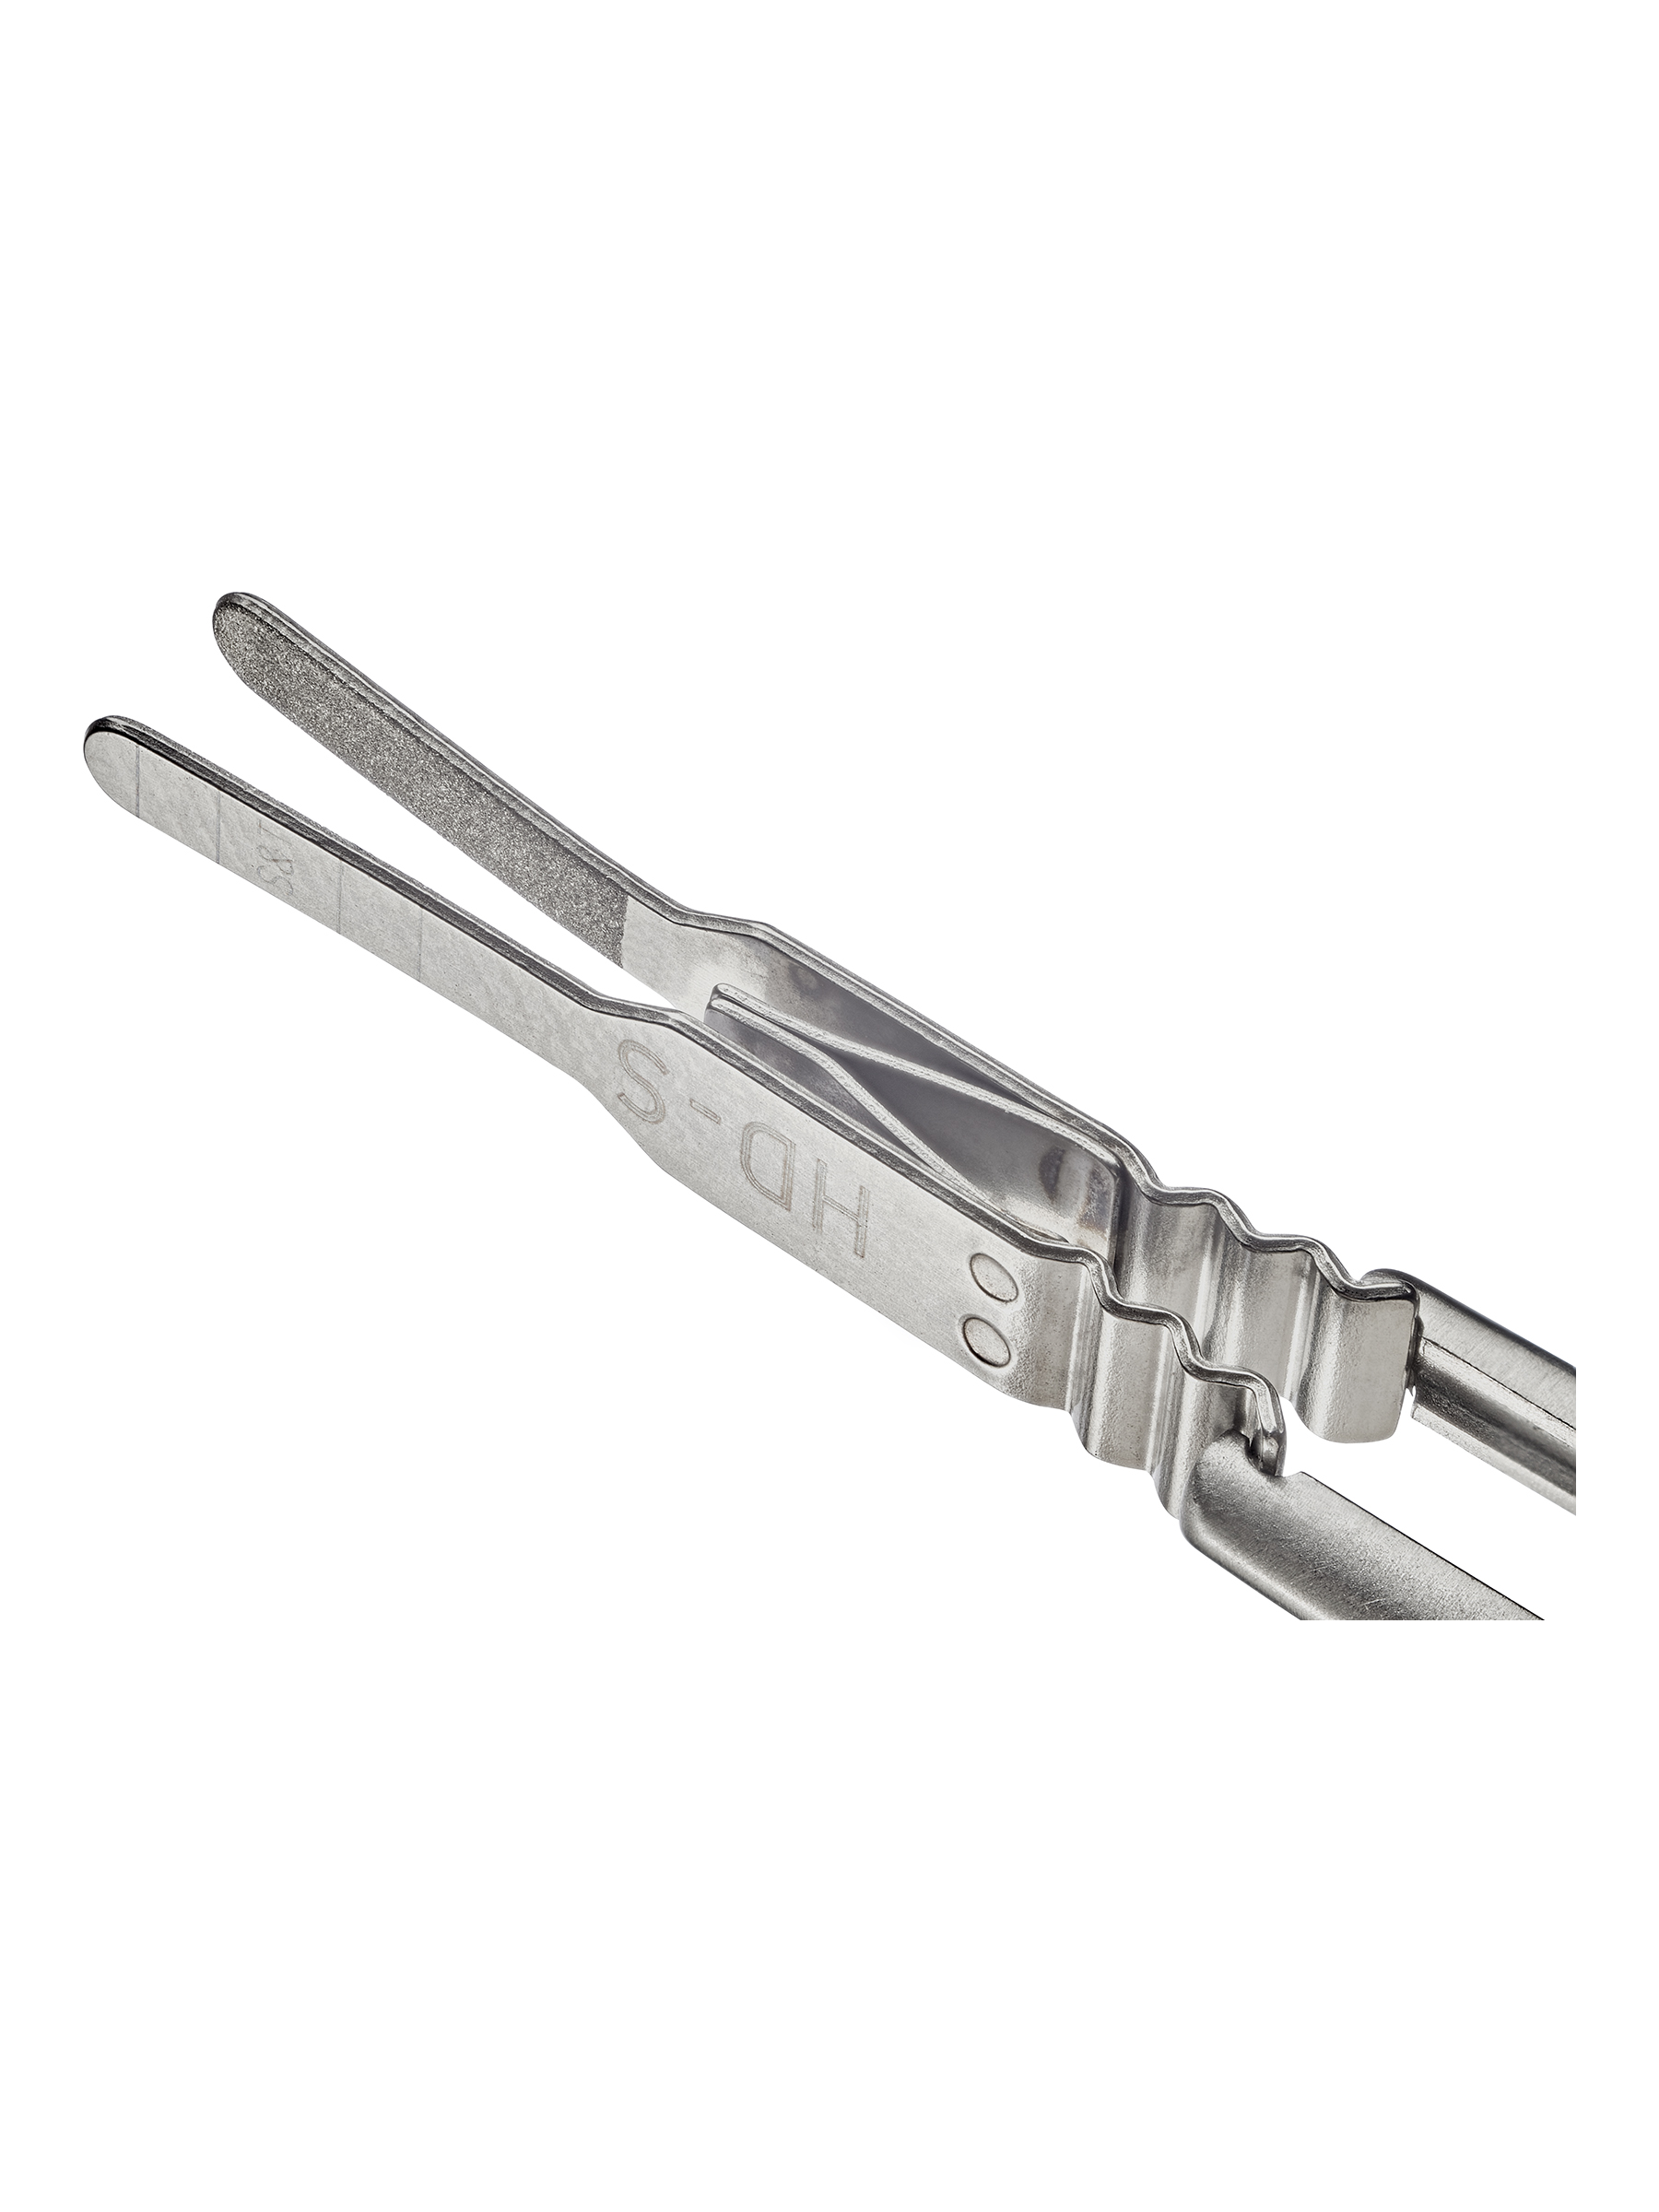 S&T Vascular Clamps